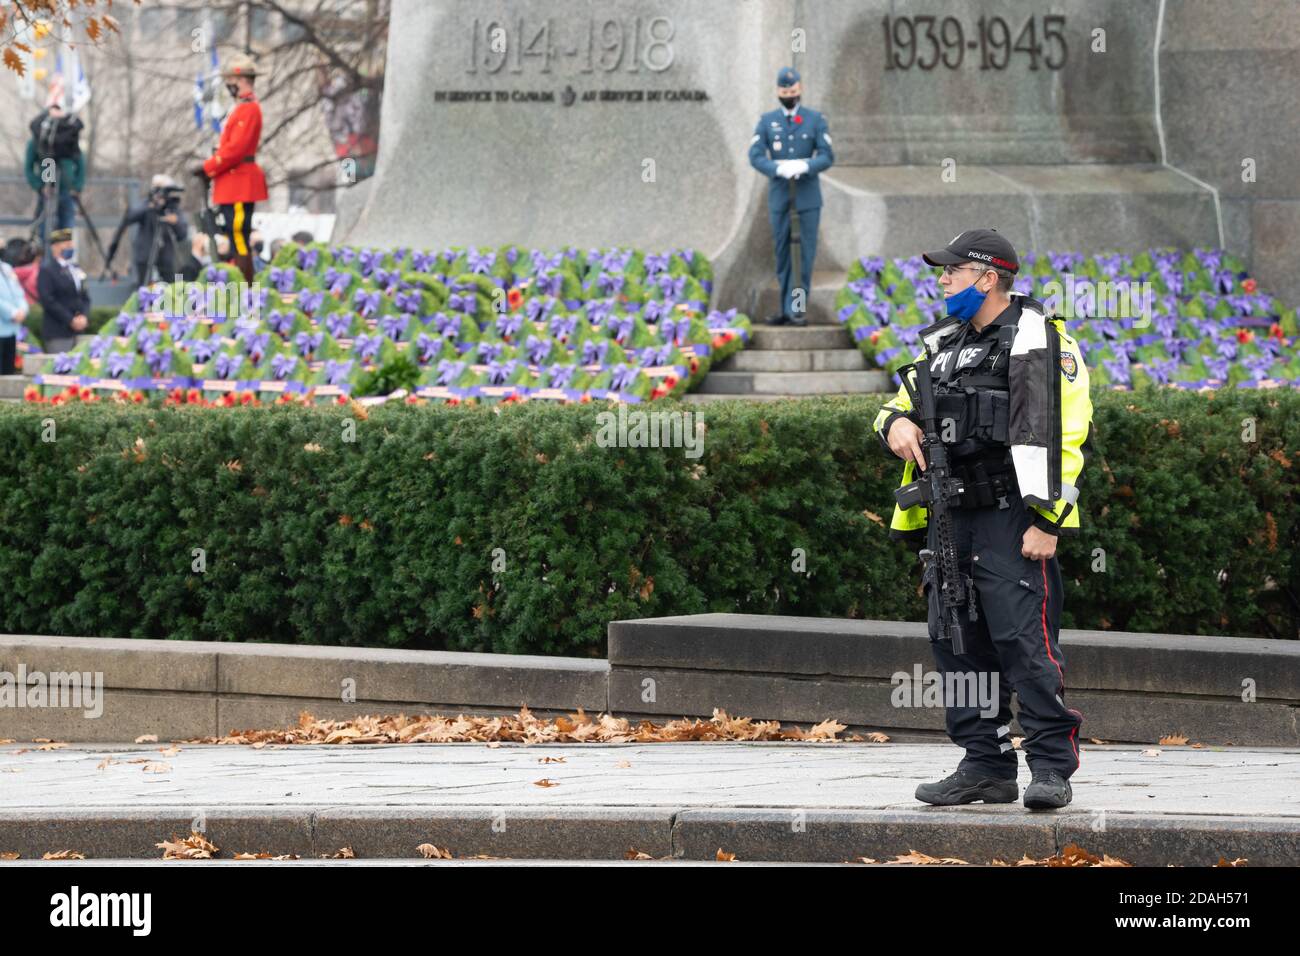 A visibly armed police officer prevents the general public from attending the Remembrance Day ceremony in Ottawa due to COVID-19. Stock Photo